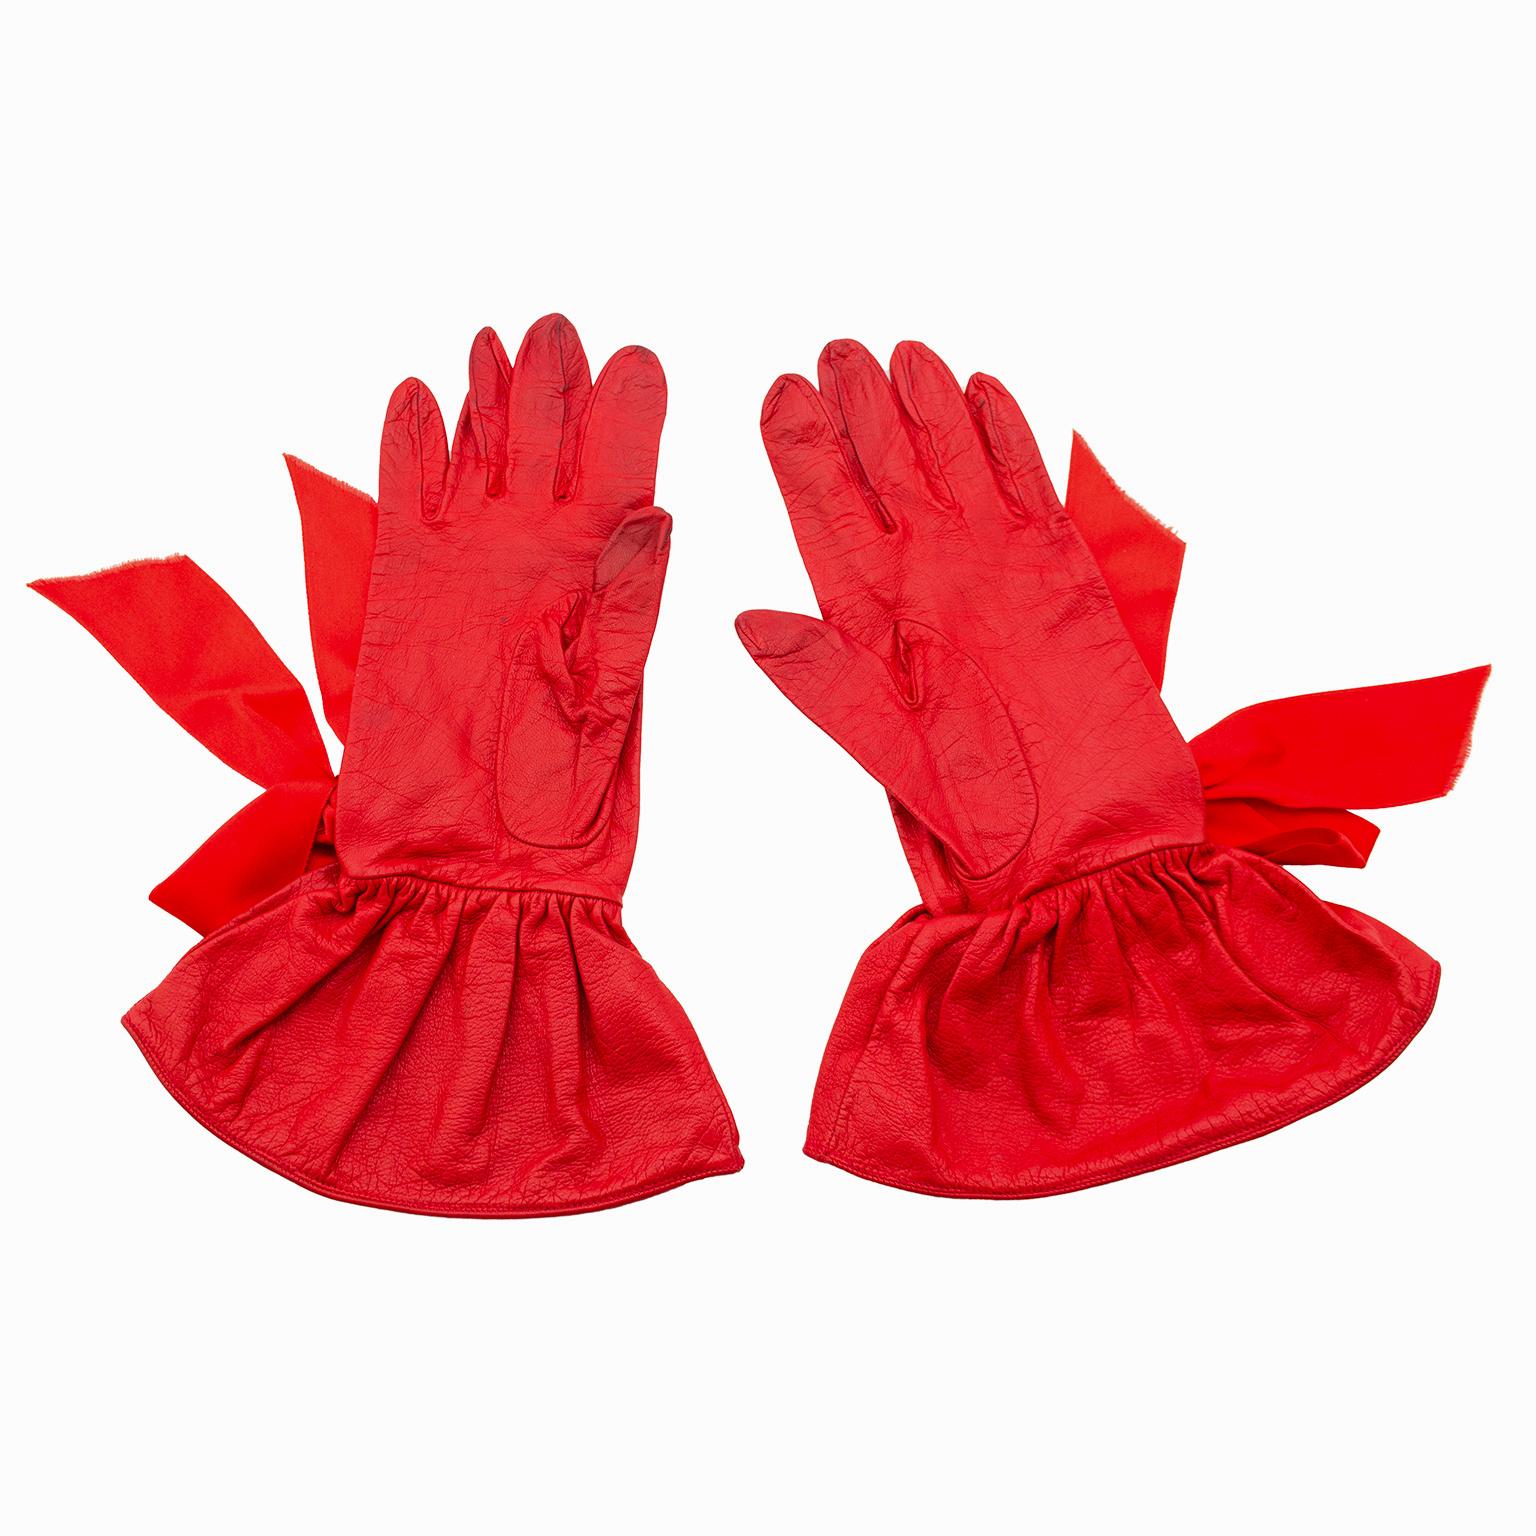 Stunning 1990s Christian Dior gloves. Supple red leather with suede interior. Gloves extend past wrist with a wide ruffle gauntlet and are embellished with large red satin bows. Matching red top stitching. Size 7 3/4. Good vintage condition - some